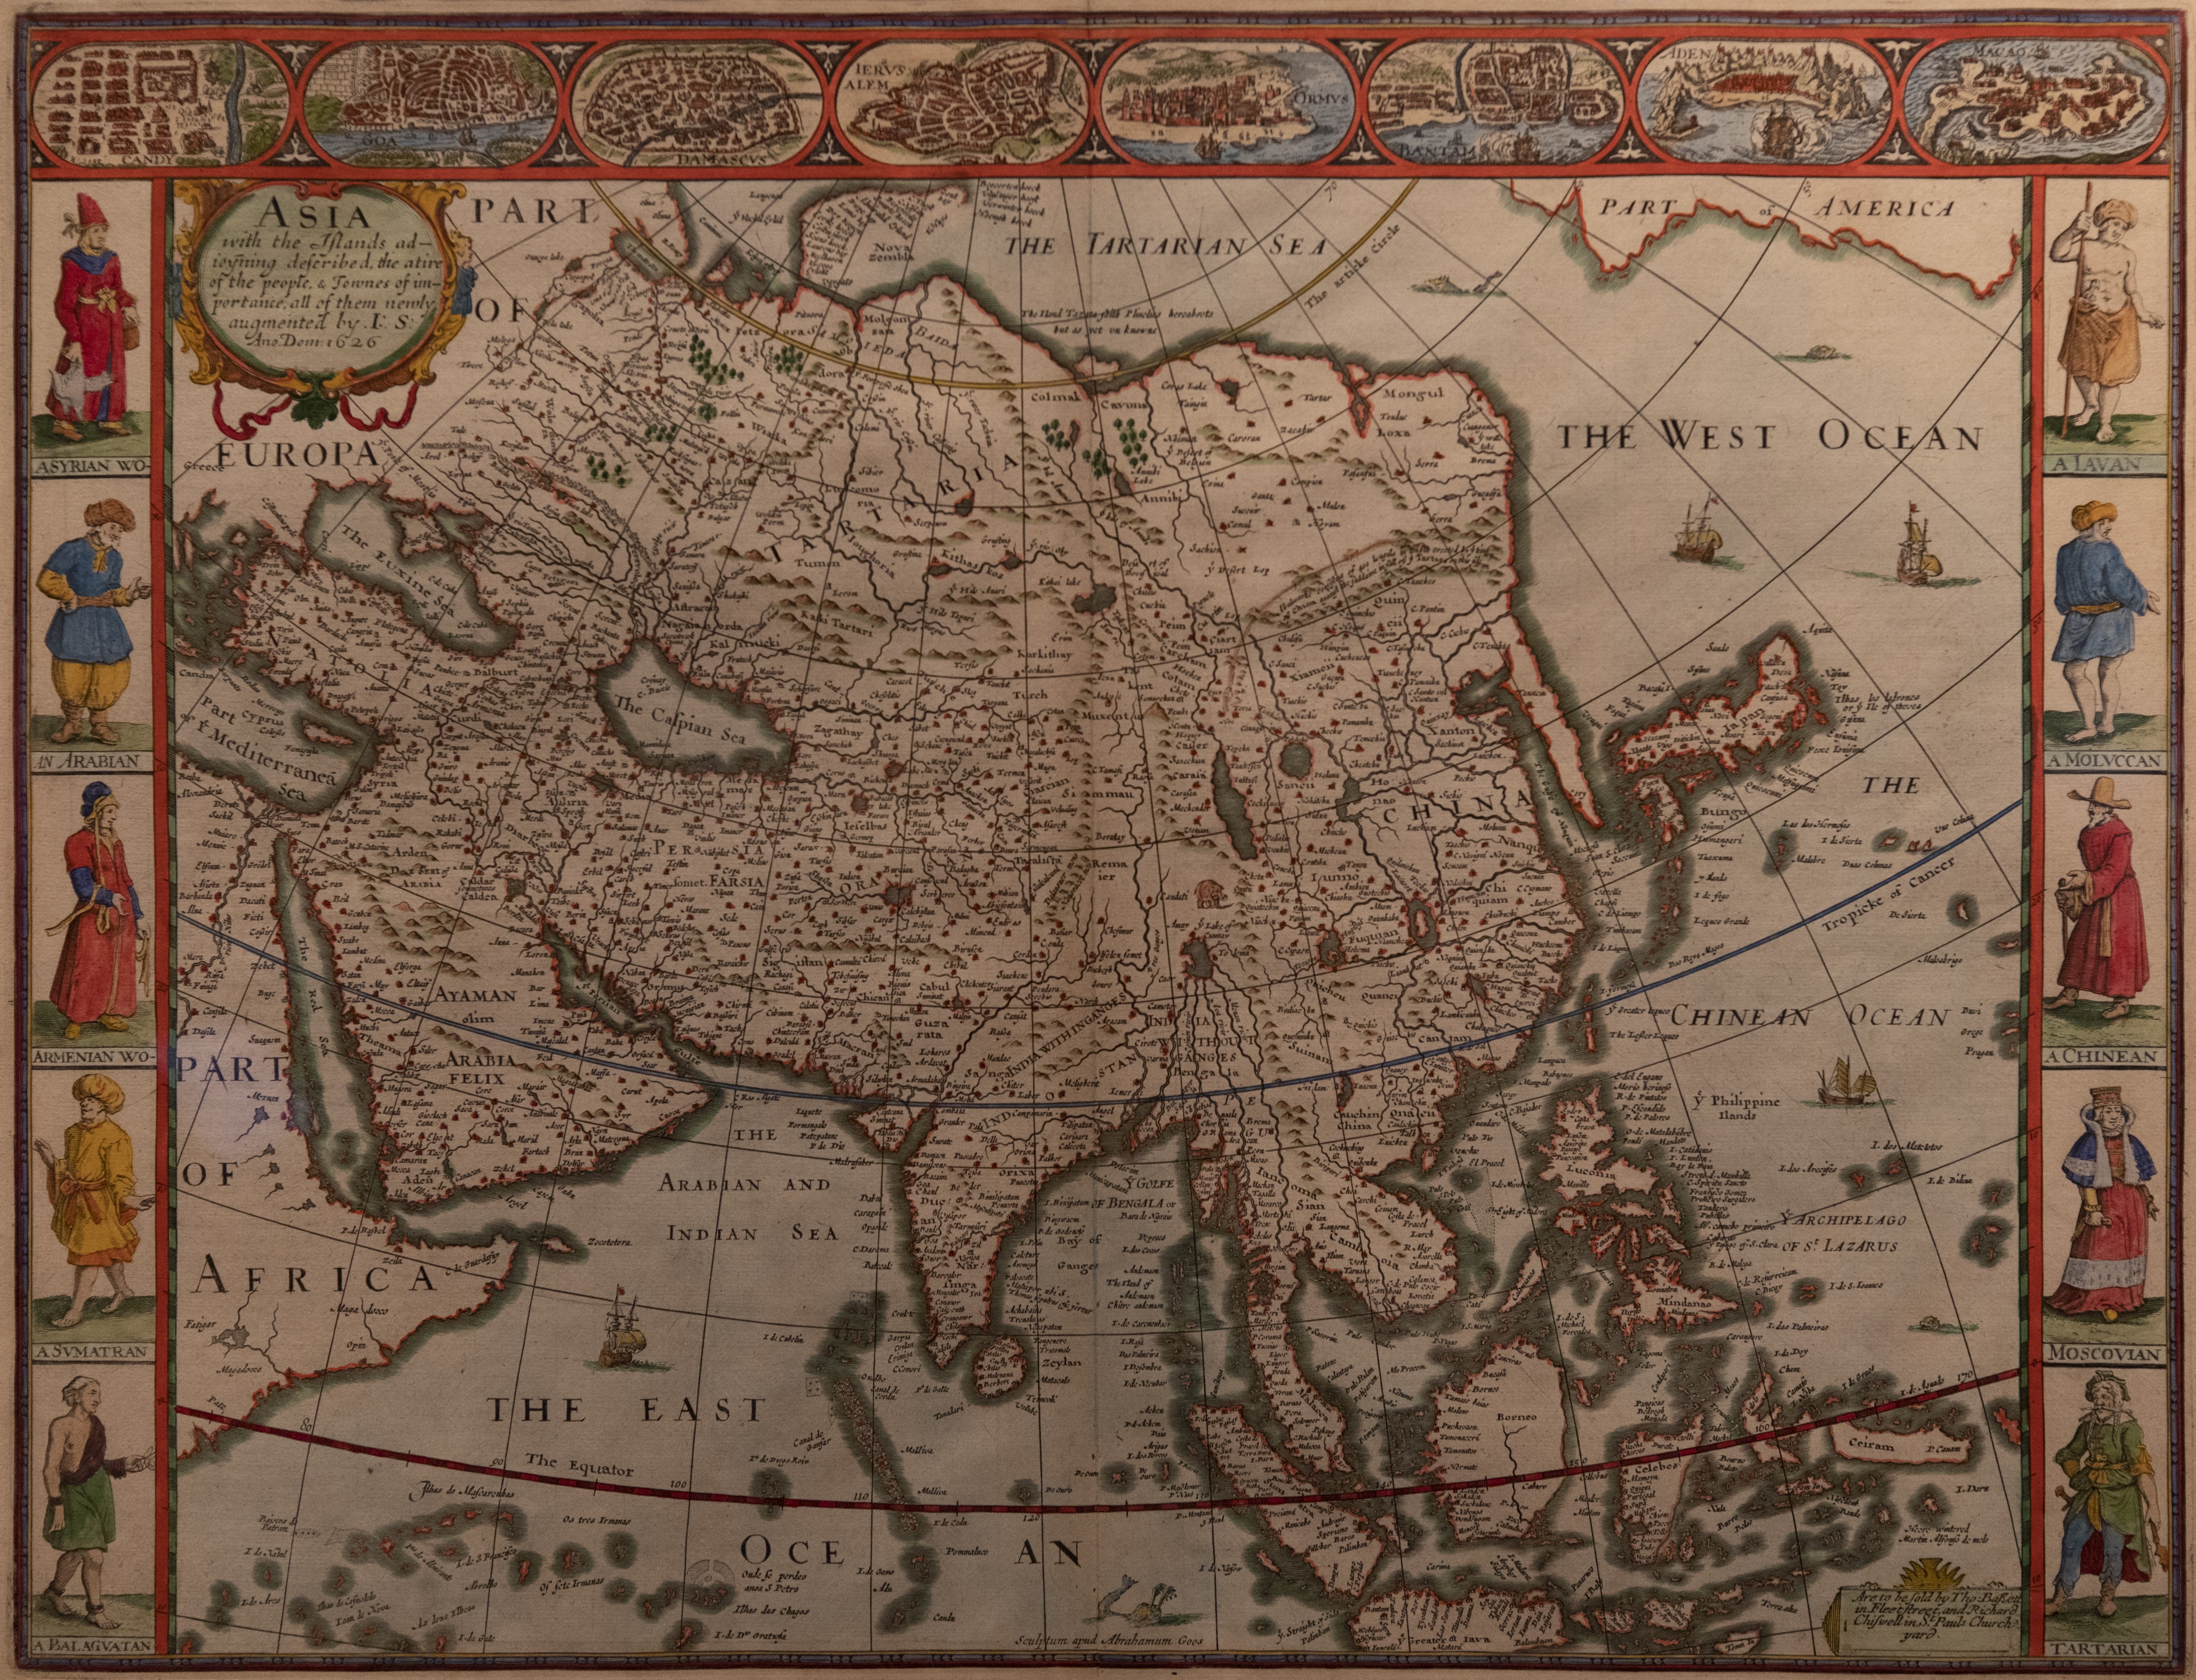 A map by Englishman historian and cartographer John Speed, published n 1676 in eluding depictions of indigenous people, including a Chinese (Chinean) at the Hong Kong Maritime Museum as part of an exhibition called “The World on Paper: From Square to Sphericity”. on December 27, 2019. 27DEC19 [03JANUARY2019 FEATURES] SCMP / Antony DICKSON